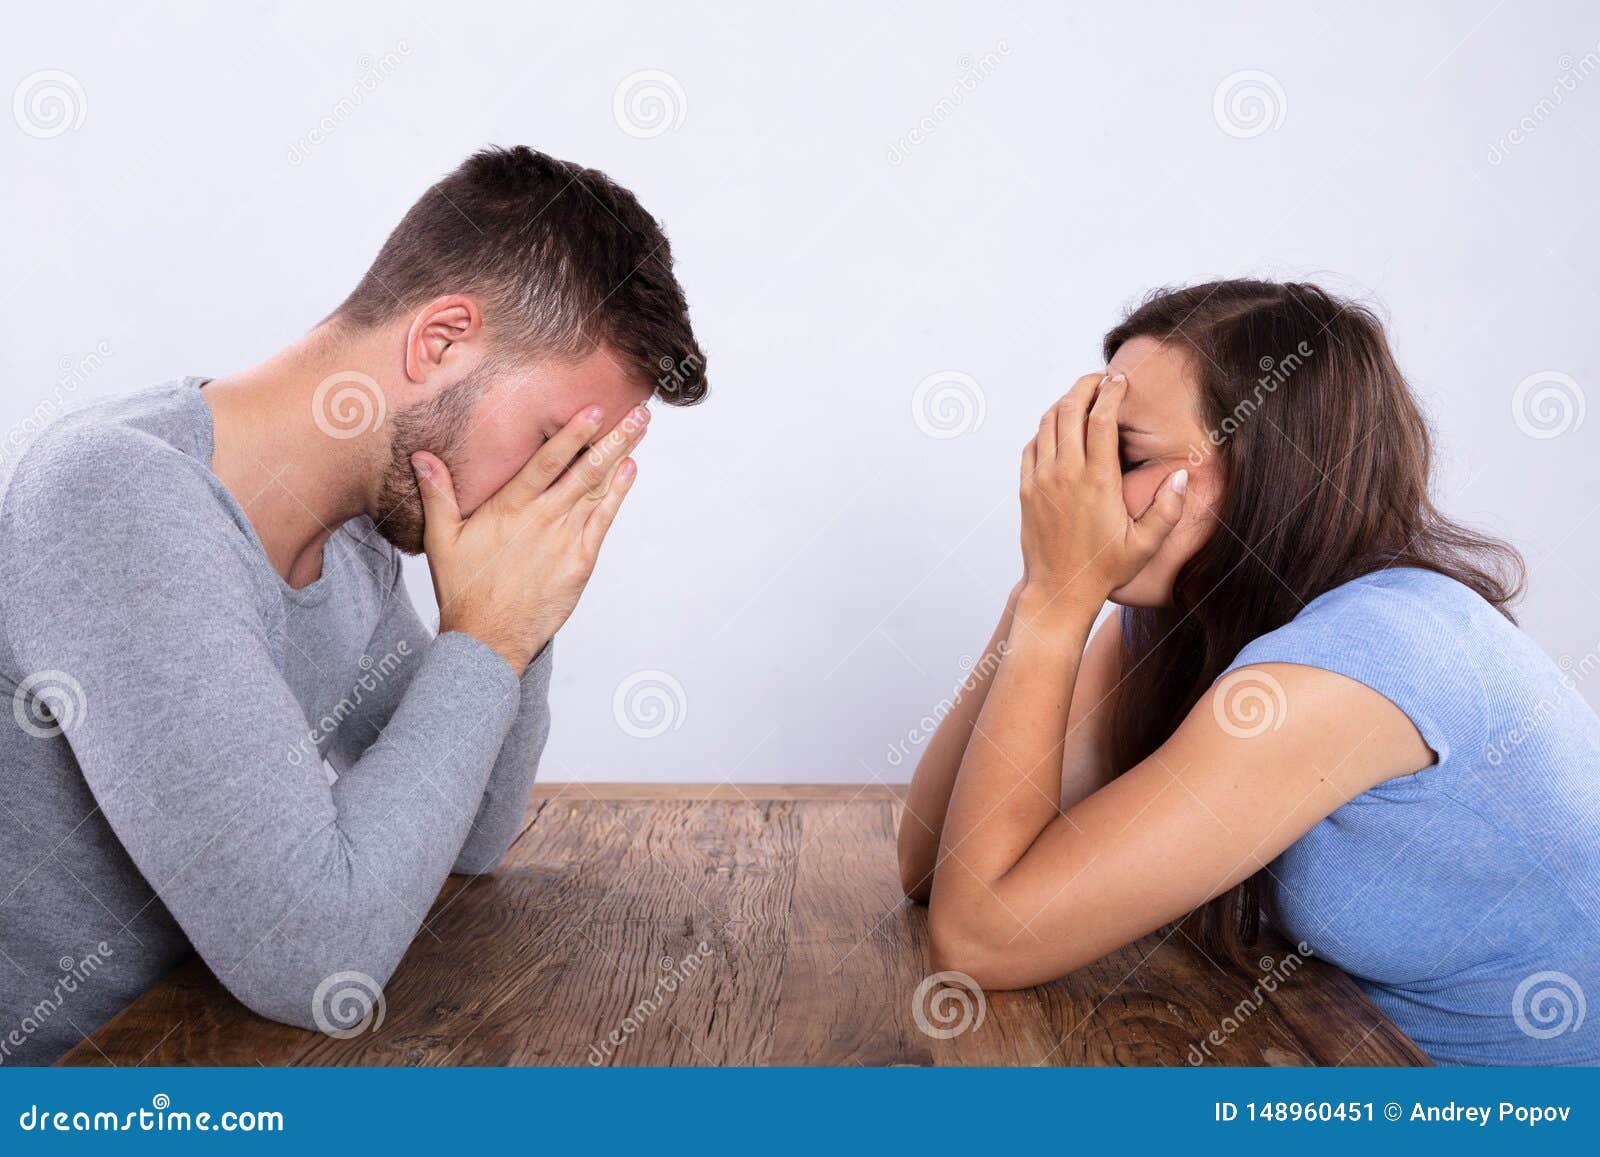 Depressed Couple Sitting Opposite Each Other Stock Image Image Of